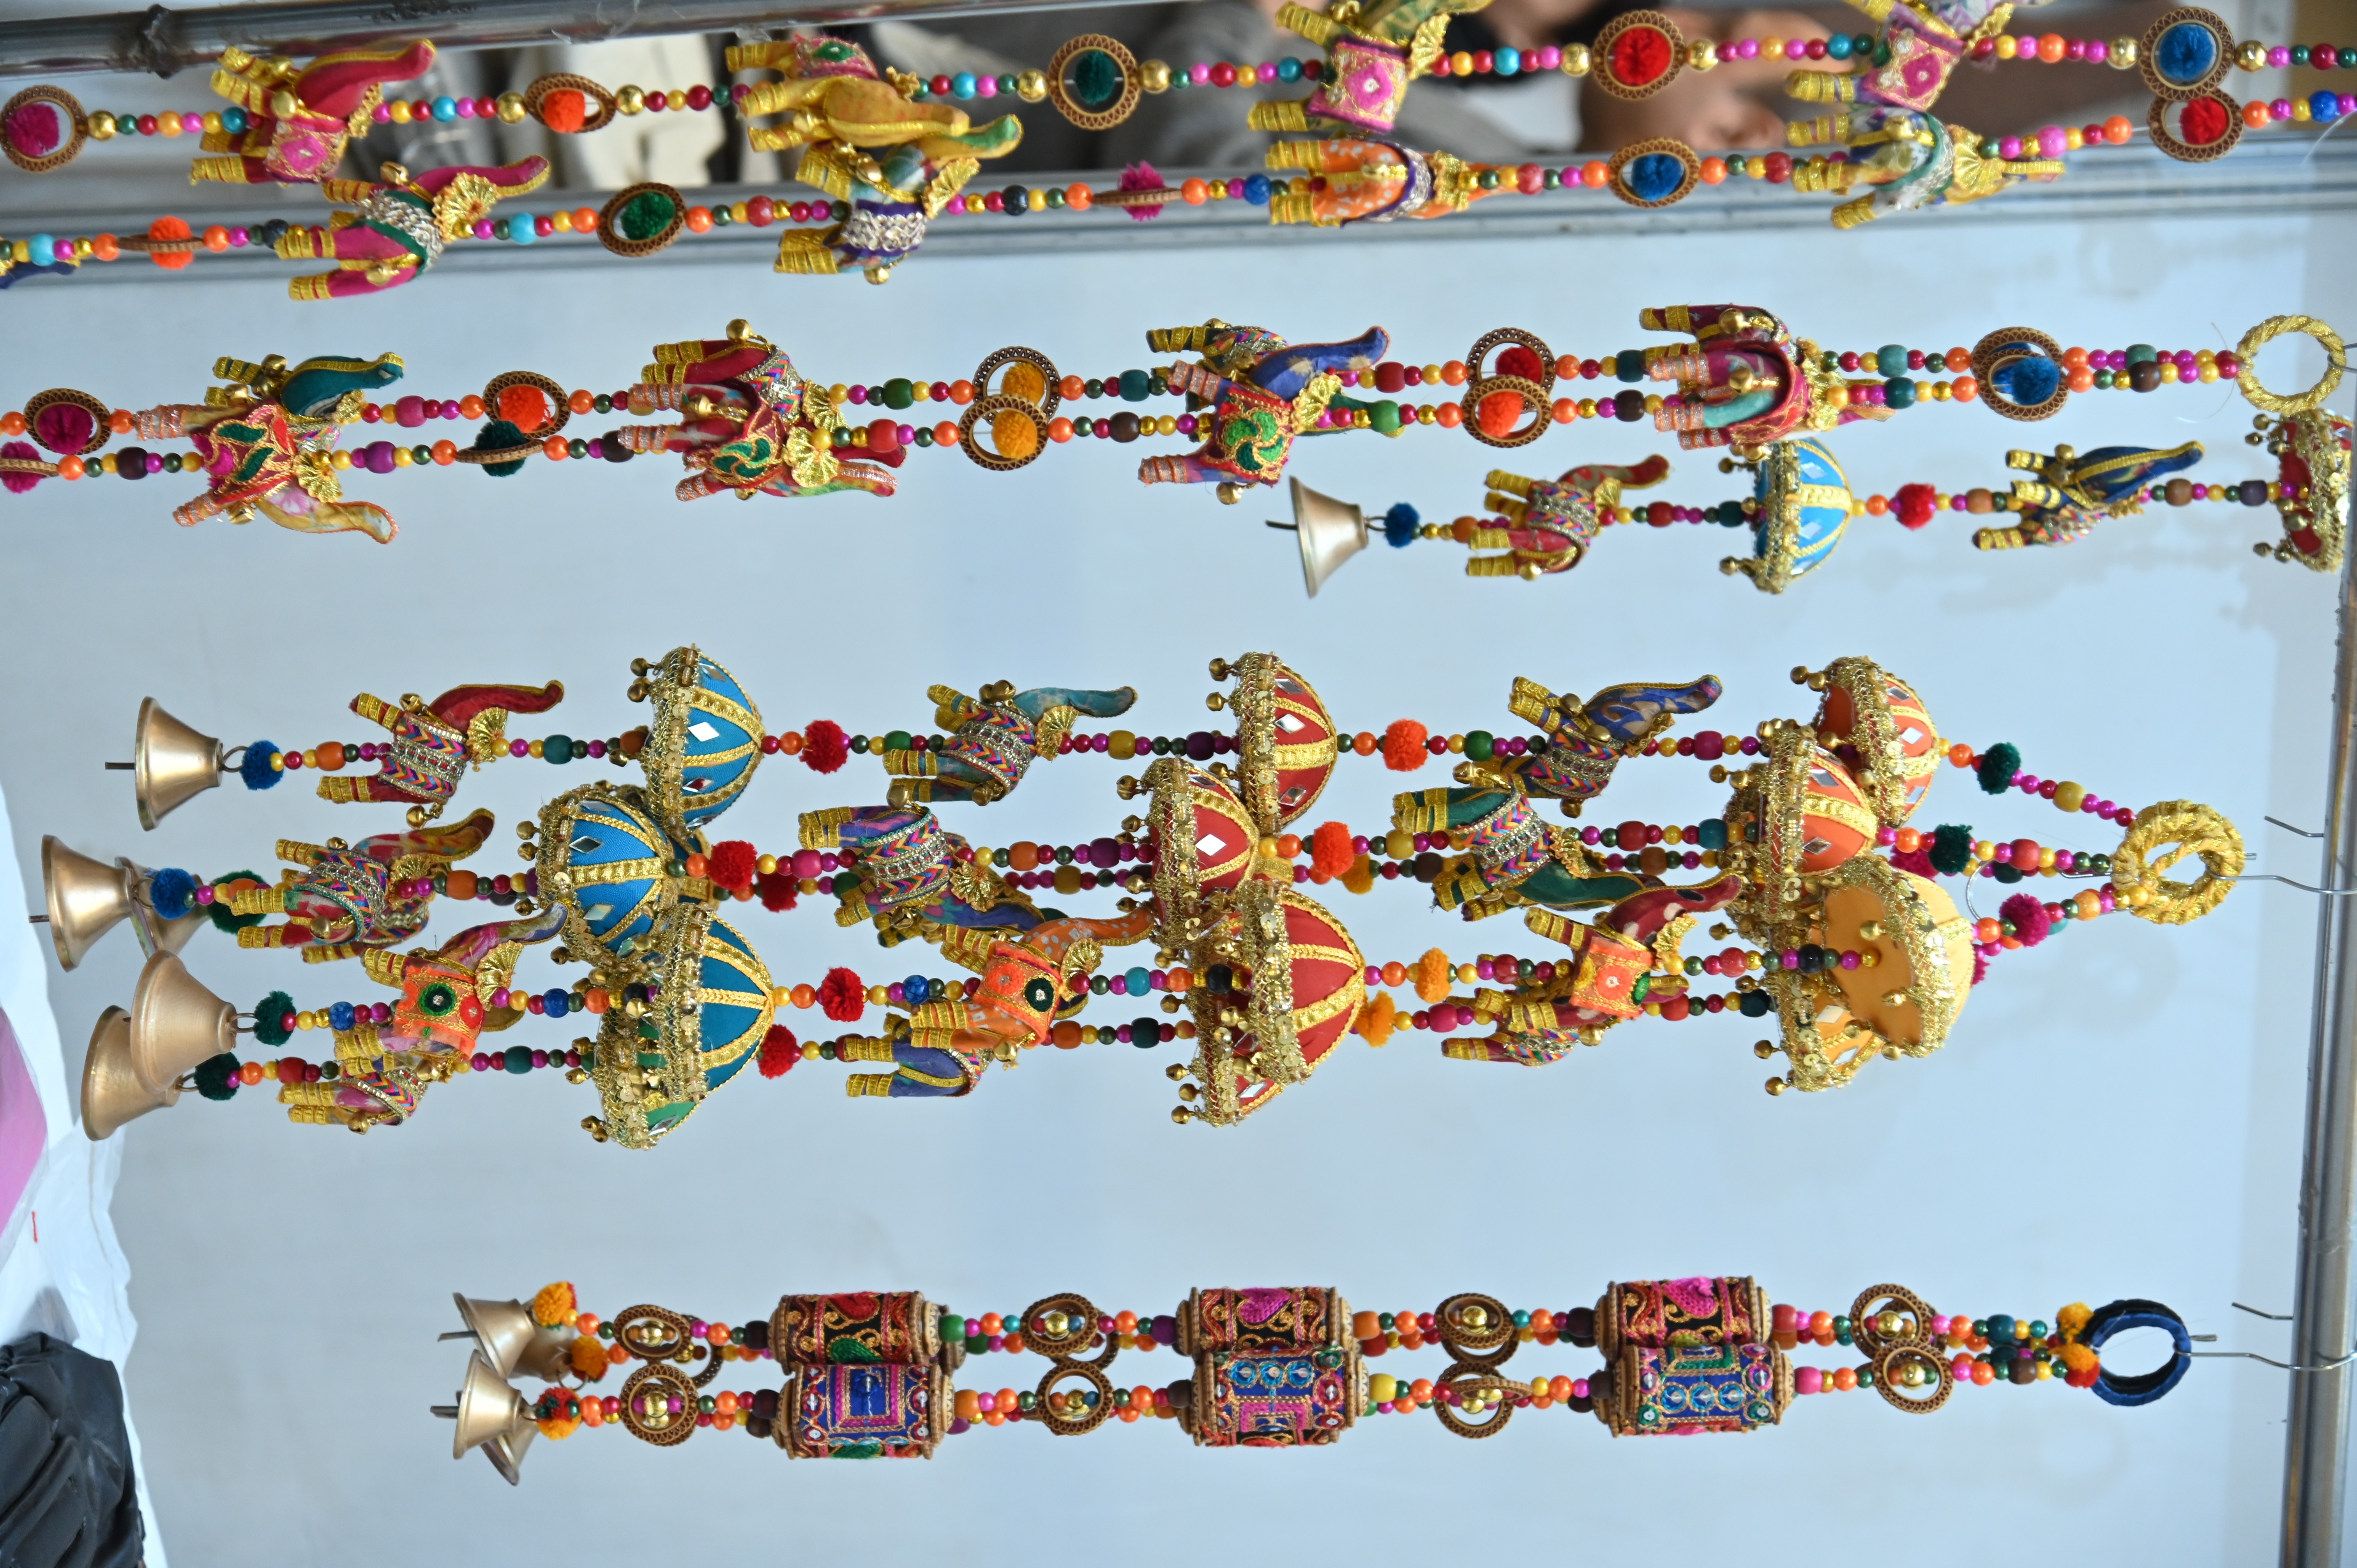 Beautiful wind chime made of colorful beads and bells